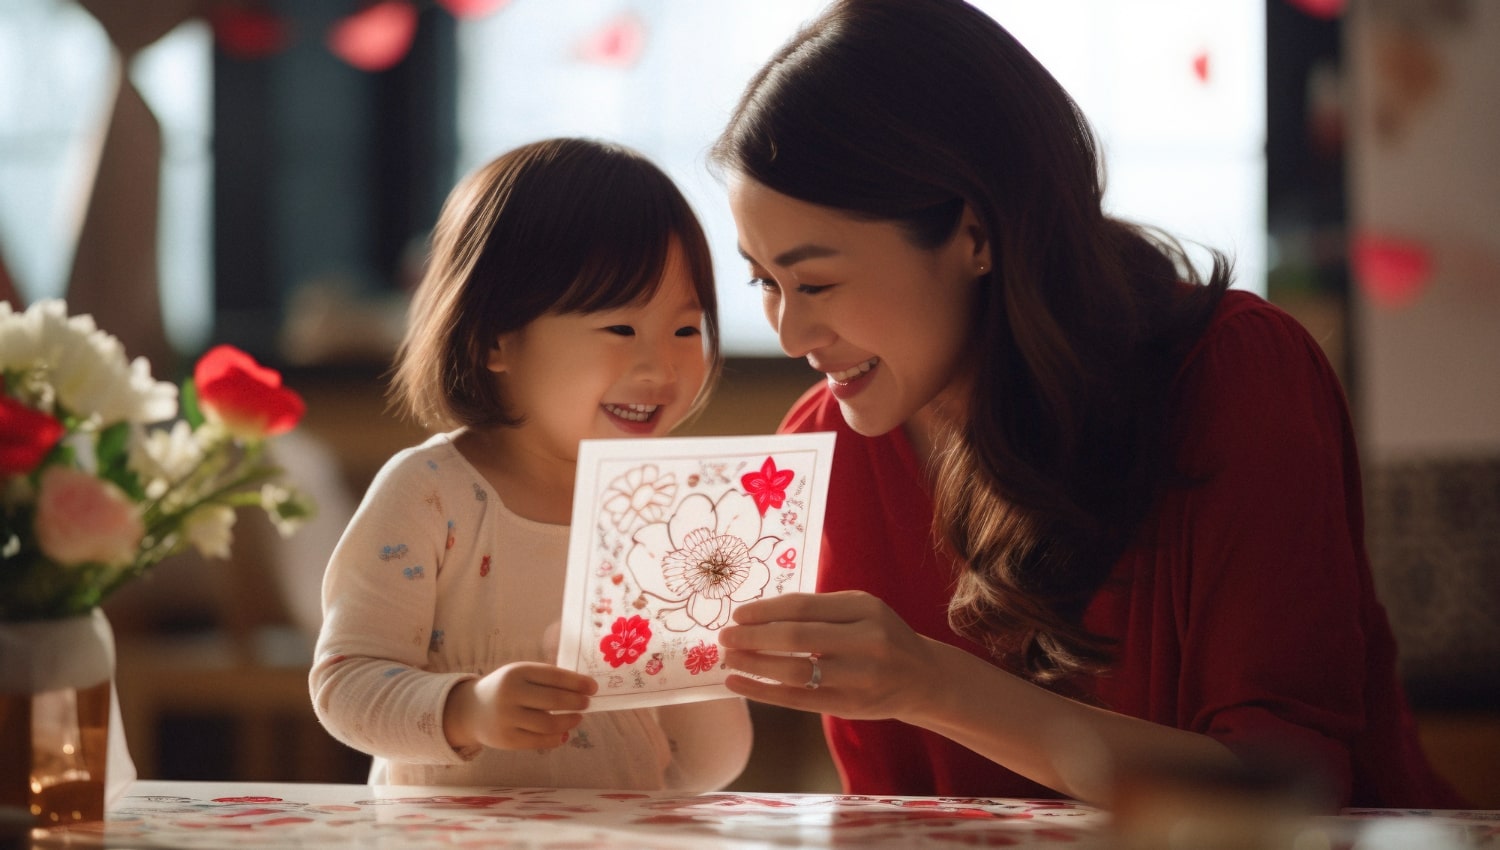 Woman and child smile, admiring new year card, enjoying family puzzles, and Chinese New Year gifts.